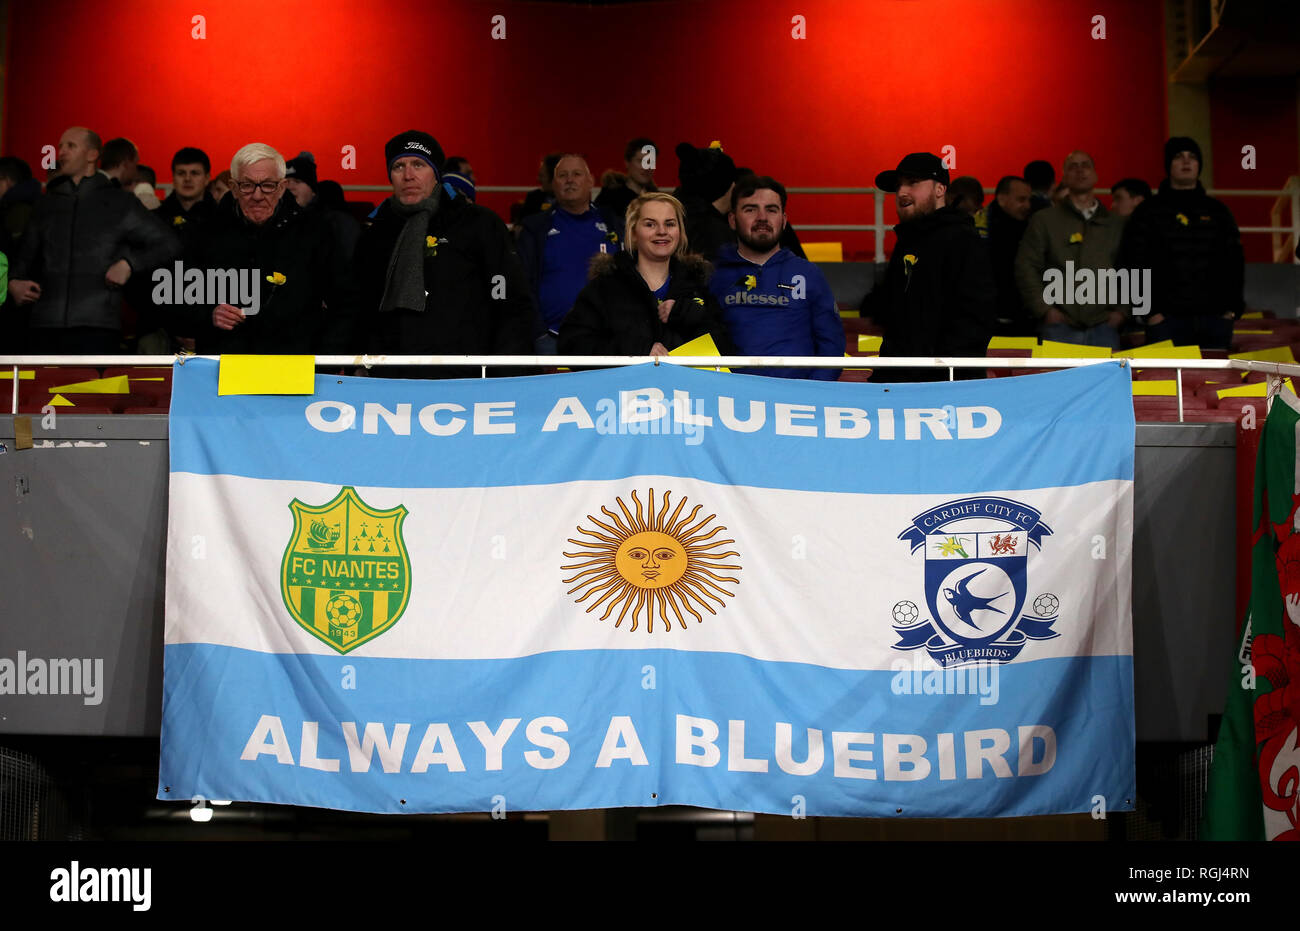 June 2019 – Cardiff City Supporters' Trust